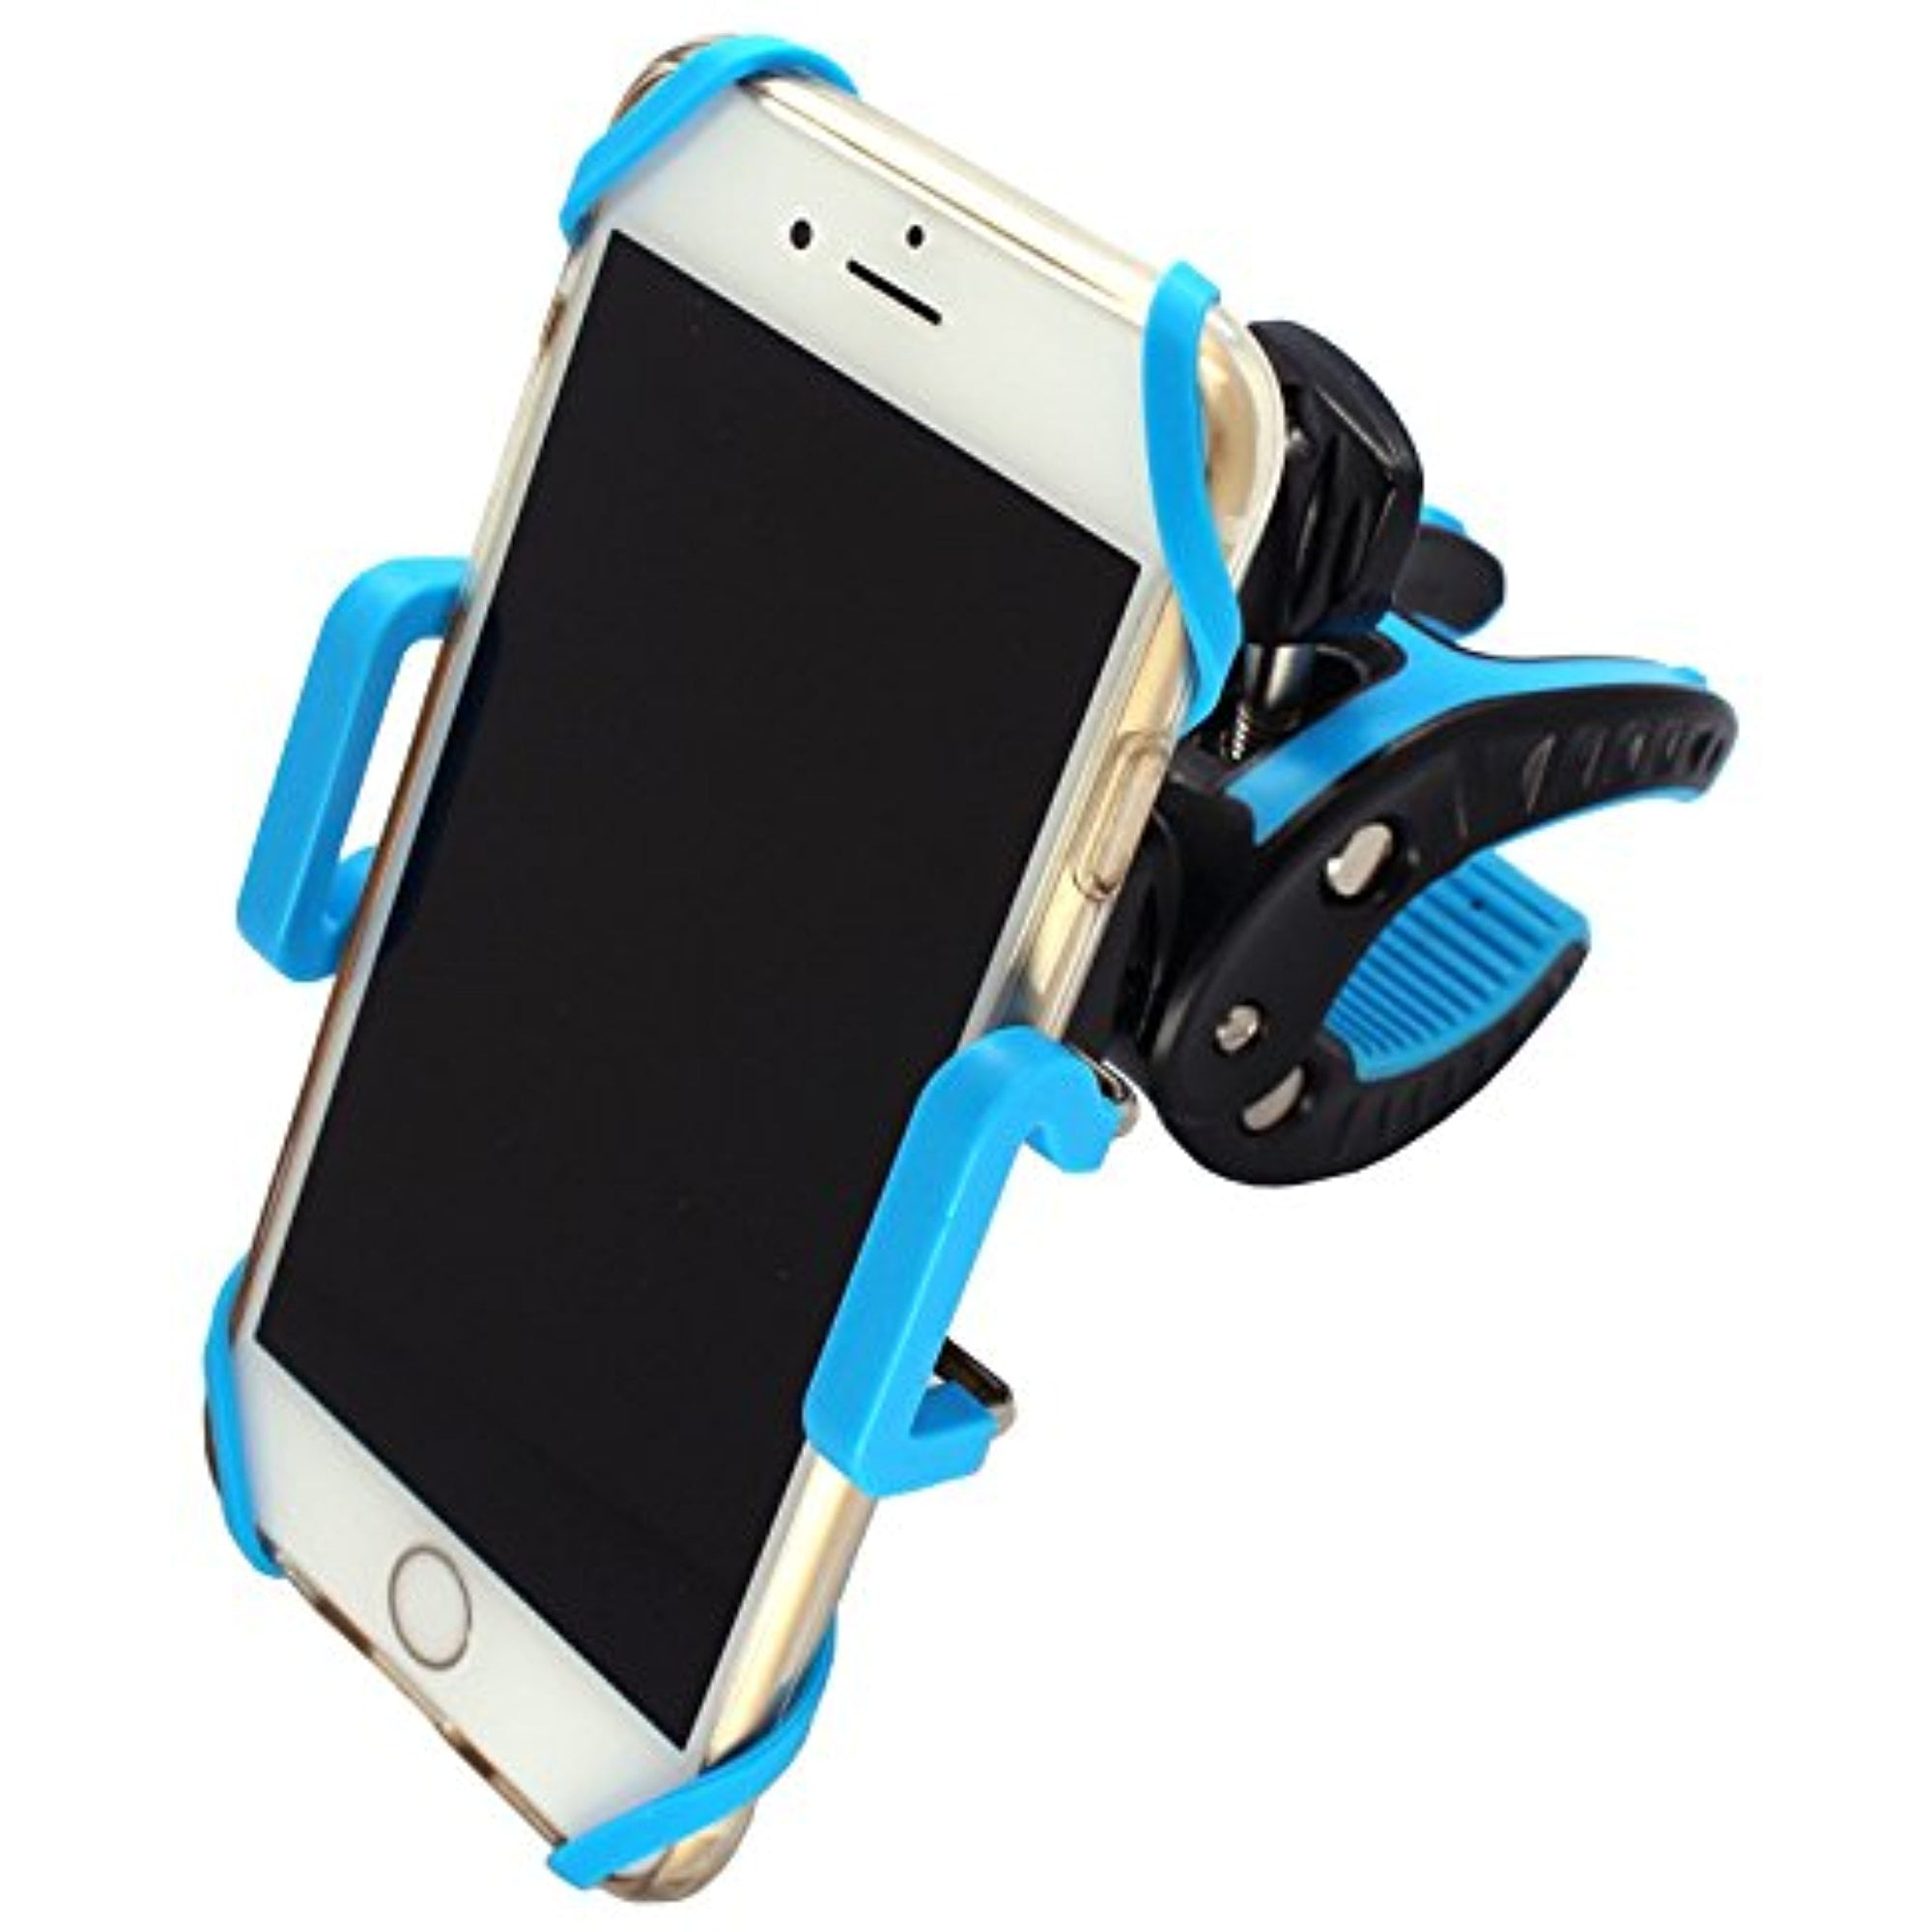 Vesting Productief Kalksteen Patent Designed Mobile Catch Grab Everywhere Universal Cell Phone Bicycle  Rack Handlebar & Motorcycle Holder Cradle for iPhone 7/6/6S/6S plus/5S/5C,Samsung  Galaxy S3/S4/S5/S6/S7 Note 3/4/5,Nexus,HTC - Walmart.com